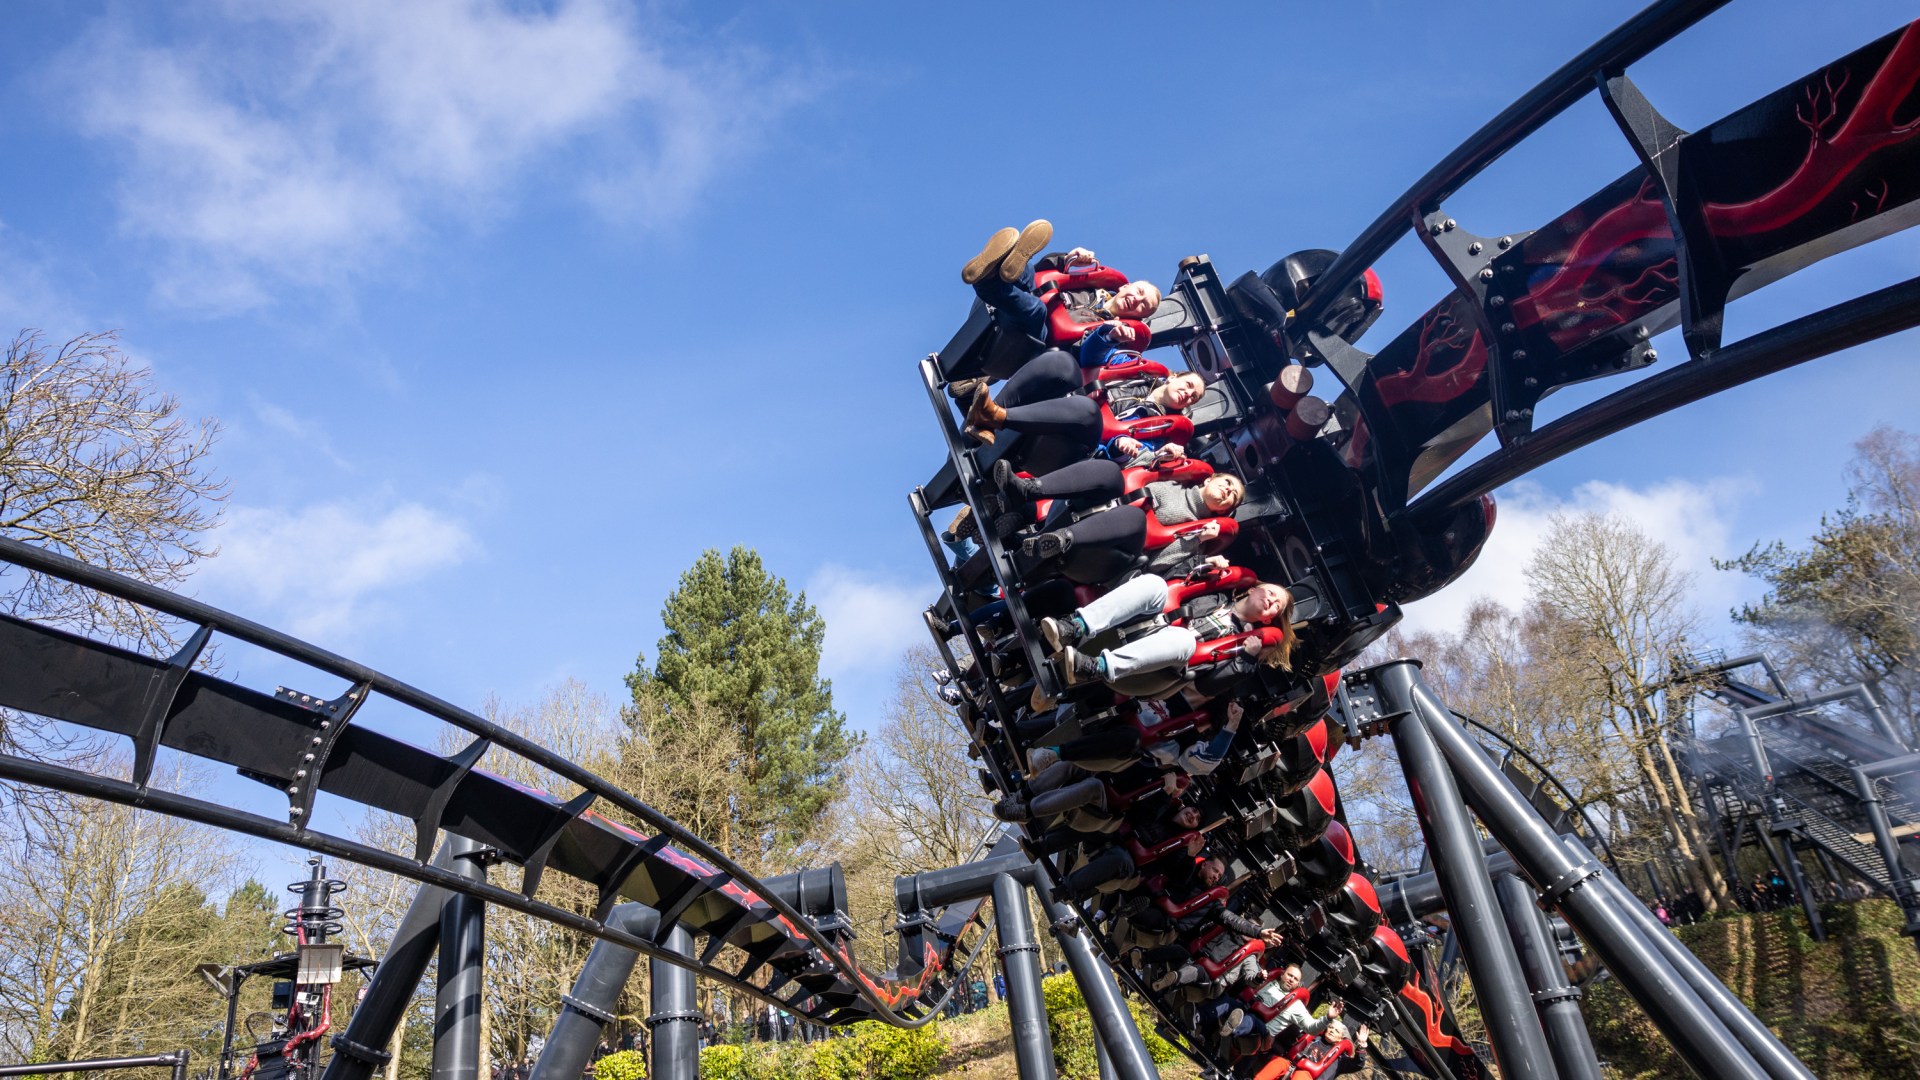 Unleash the thrill: Insider tips for conquering the Nemesis Reborn rollercoaster at Alton Towers!